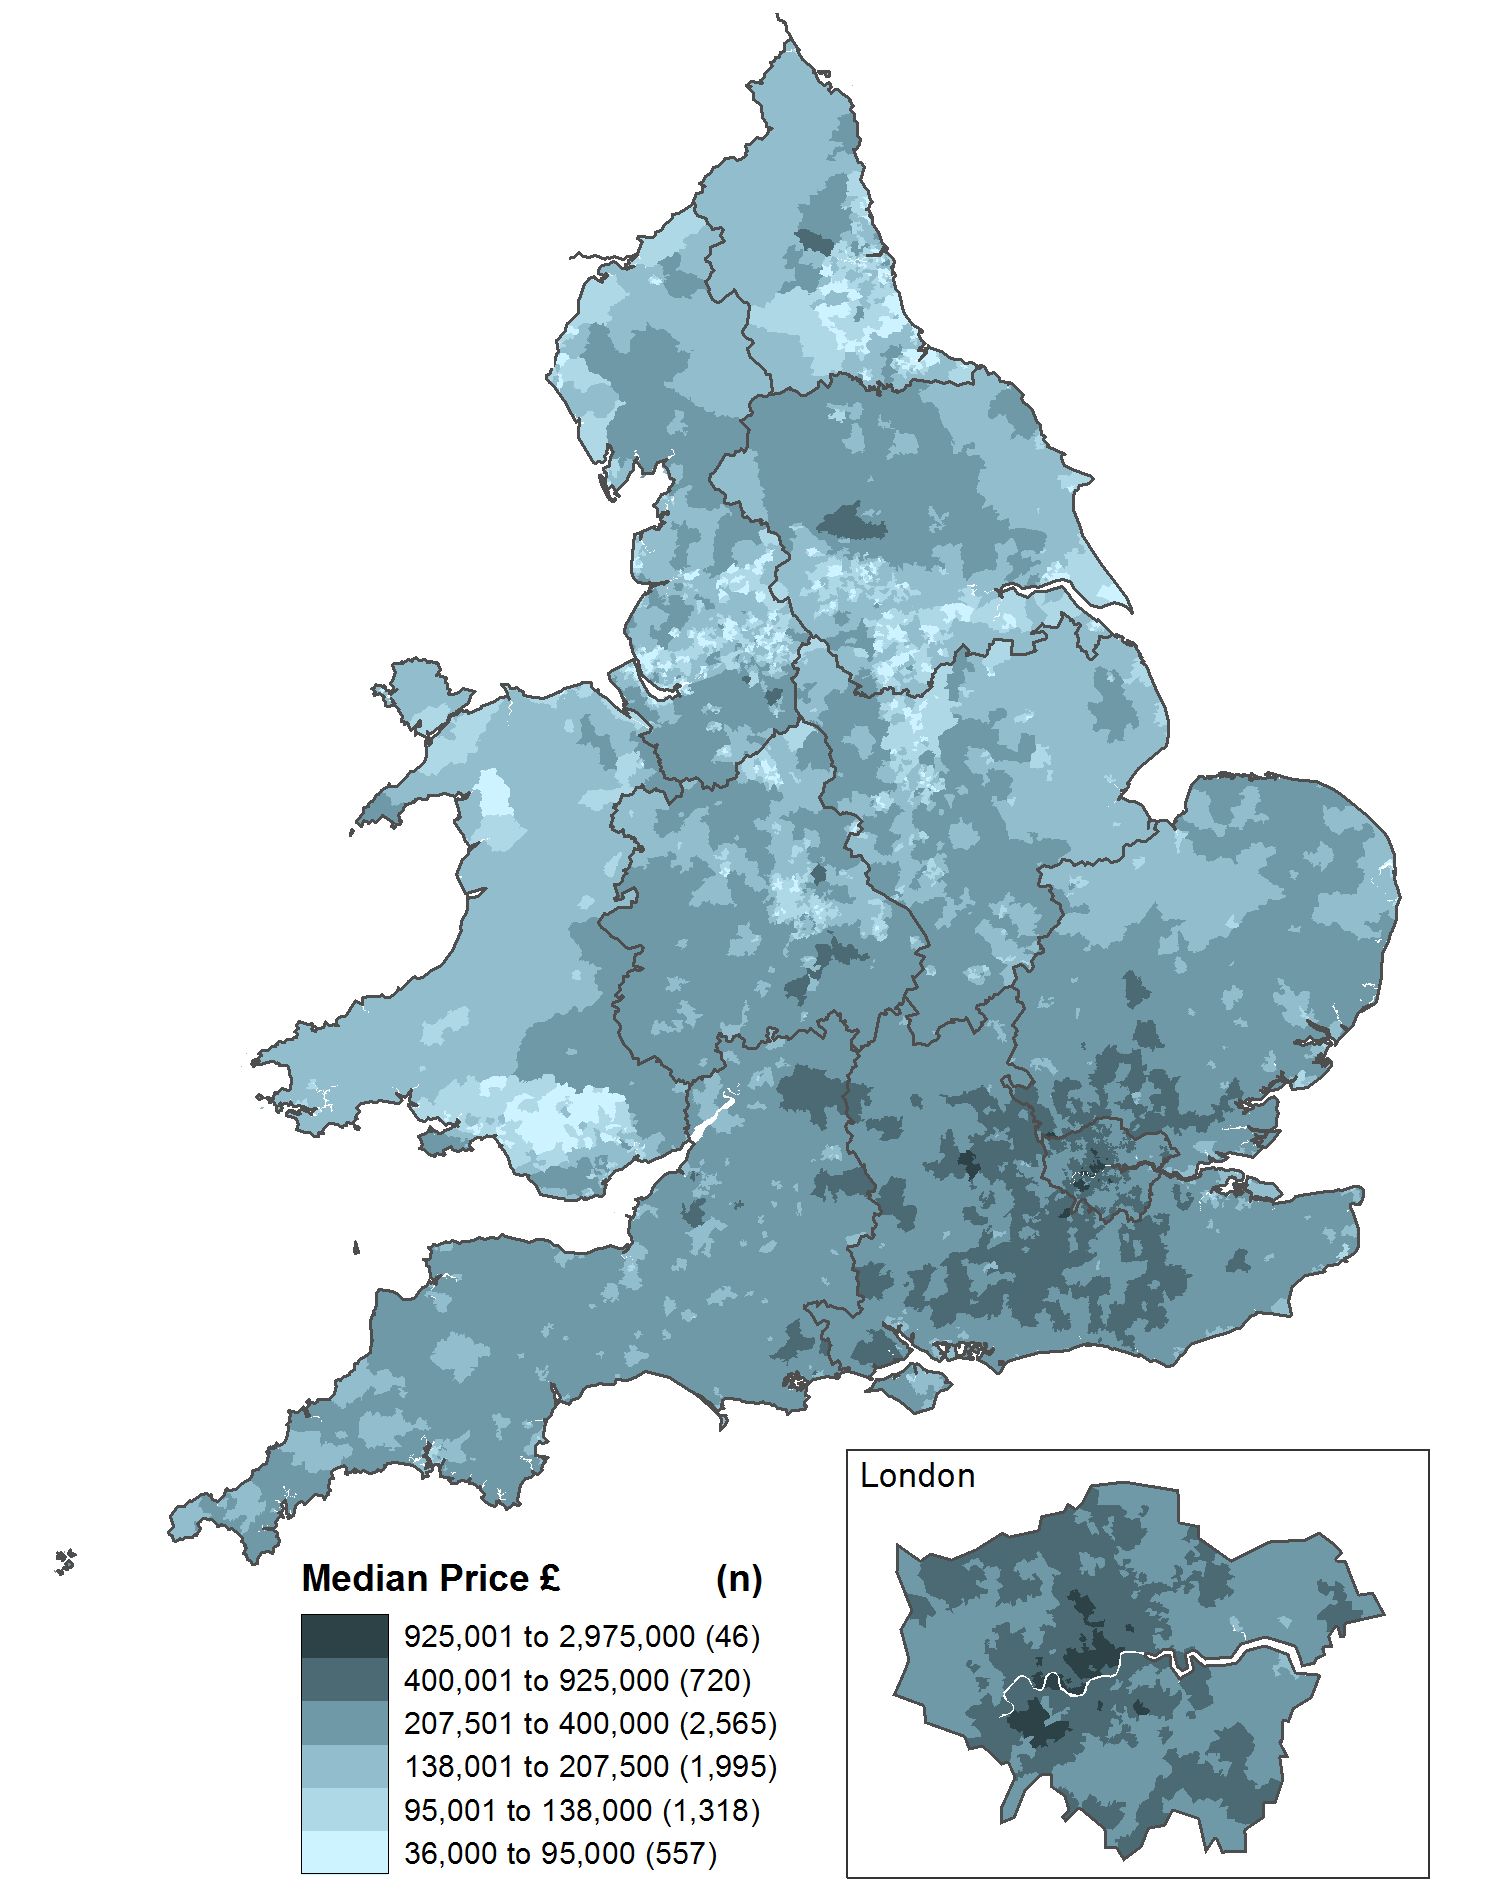 Around 1 in 10 MSOAs had a median price paid of £400,000 or more and these are concentrated in London, the South East and East of England